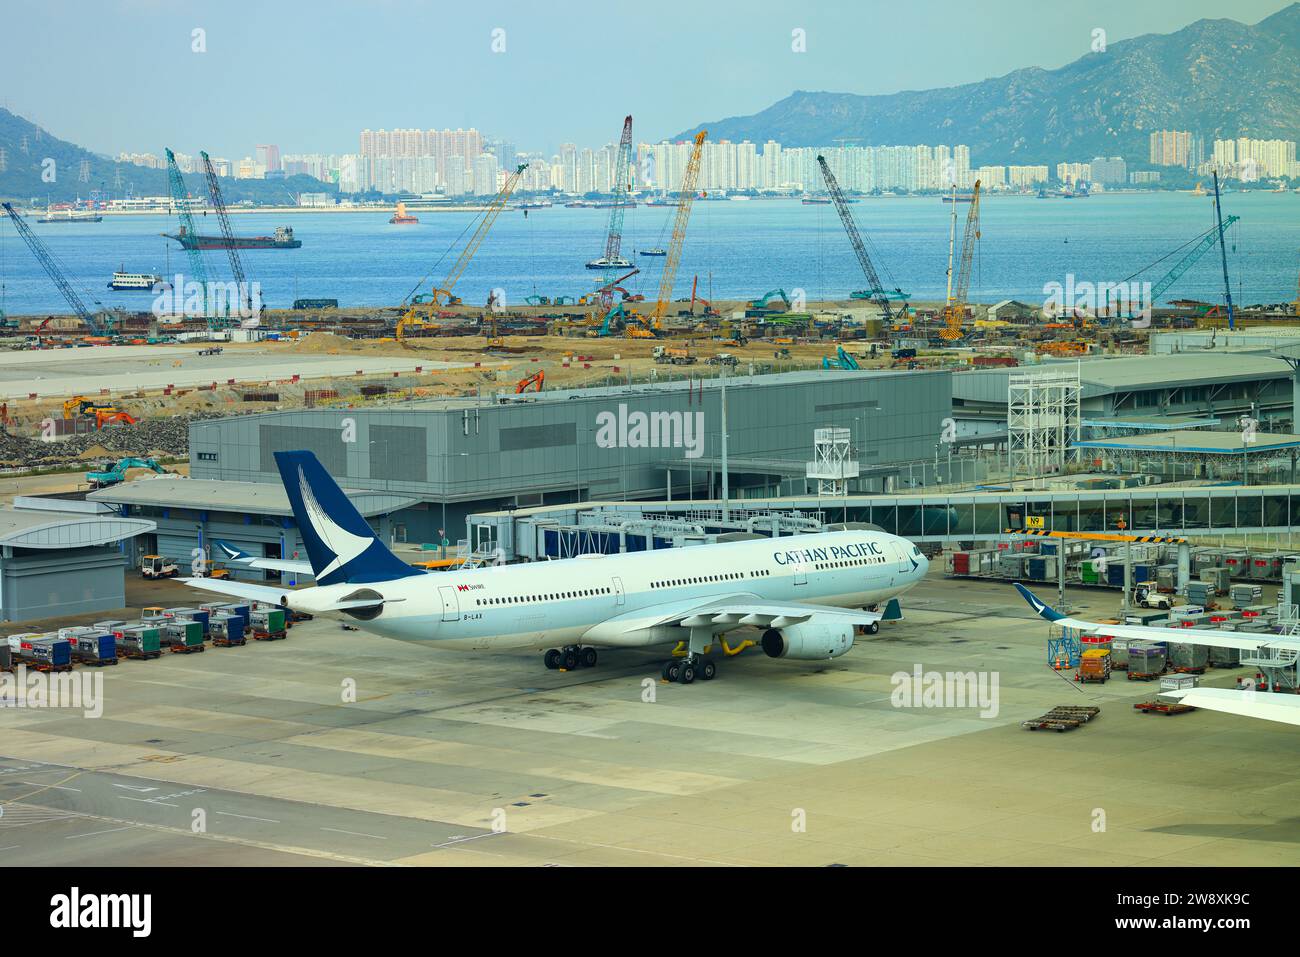 Cathay Pacific Airlines fleet Airbus A330-300 operated at Hong Kong International Airport. Stock Photo